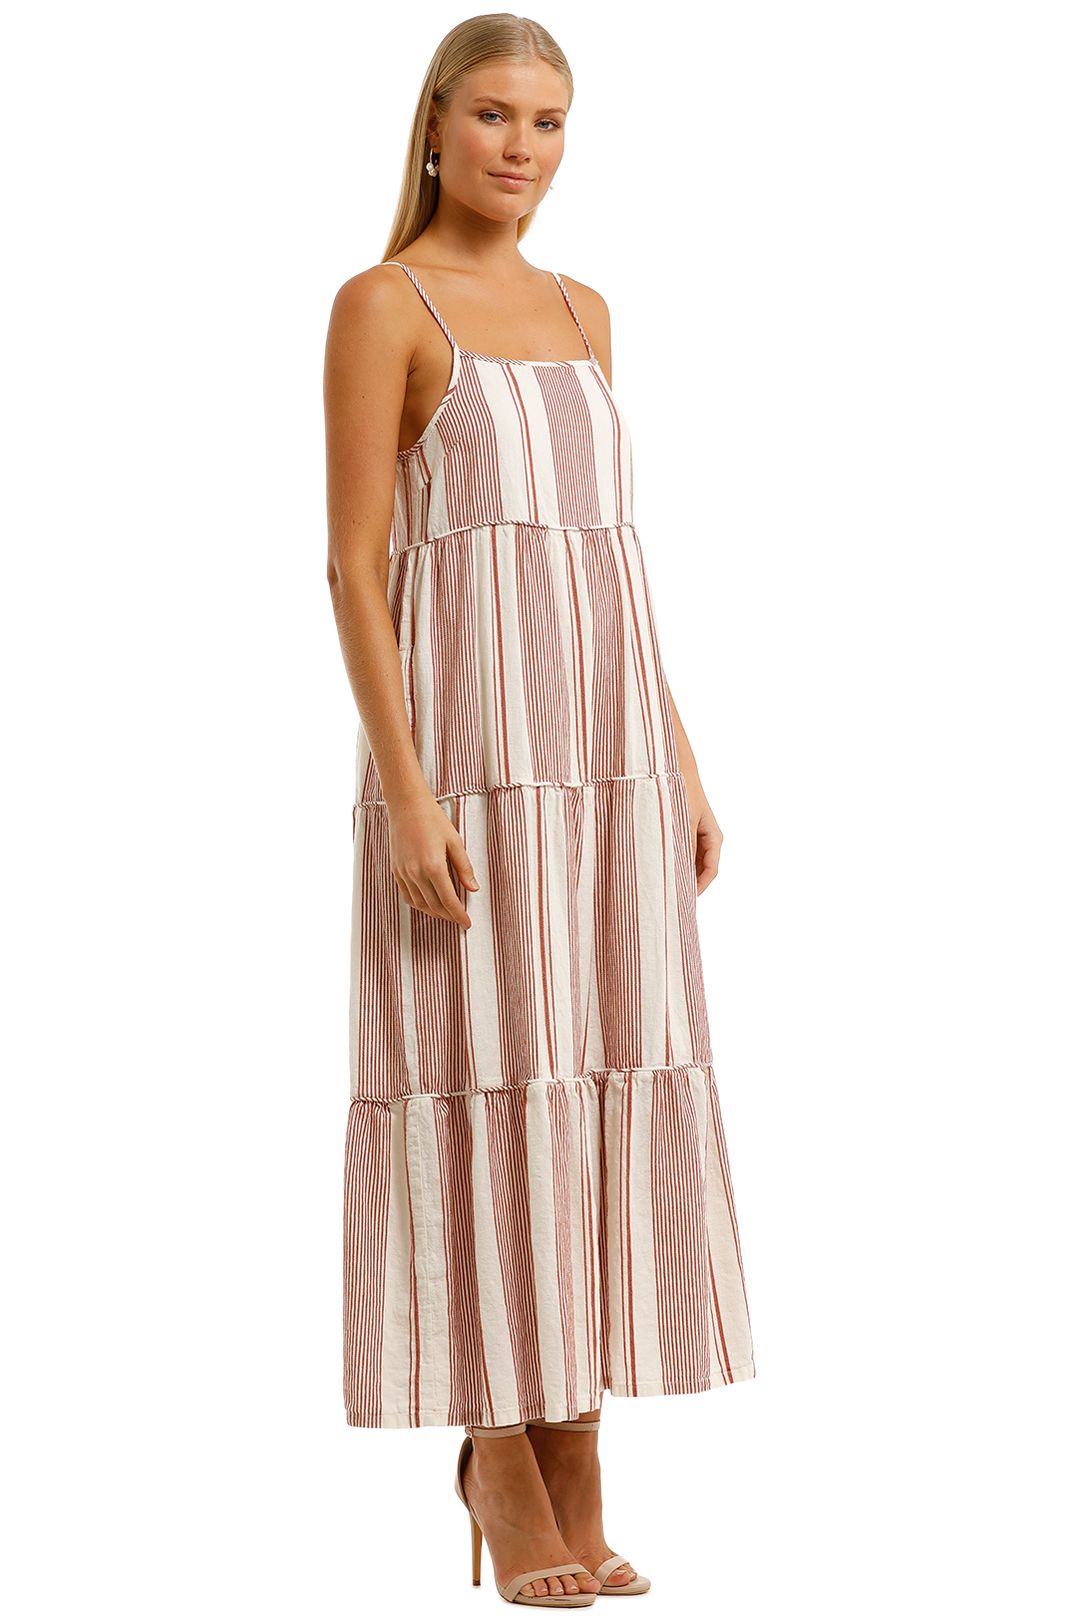 Elka-Collective-Adele-Maxi-Dress-Brown-Side